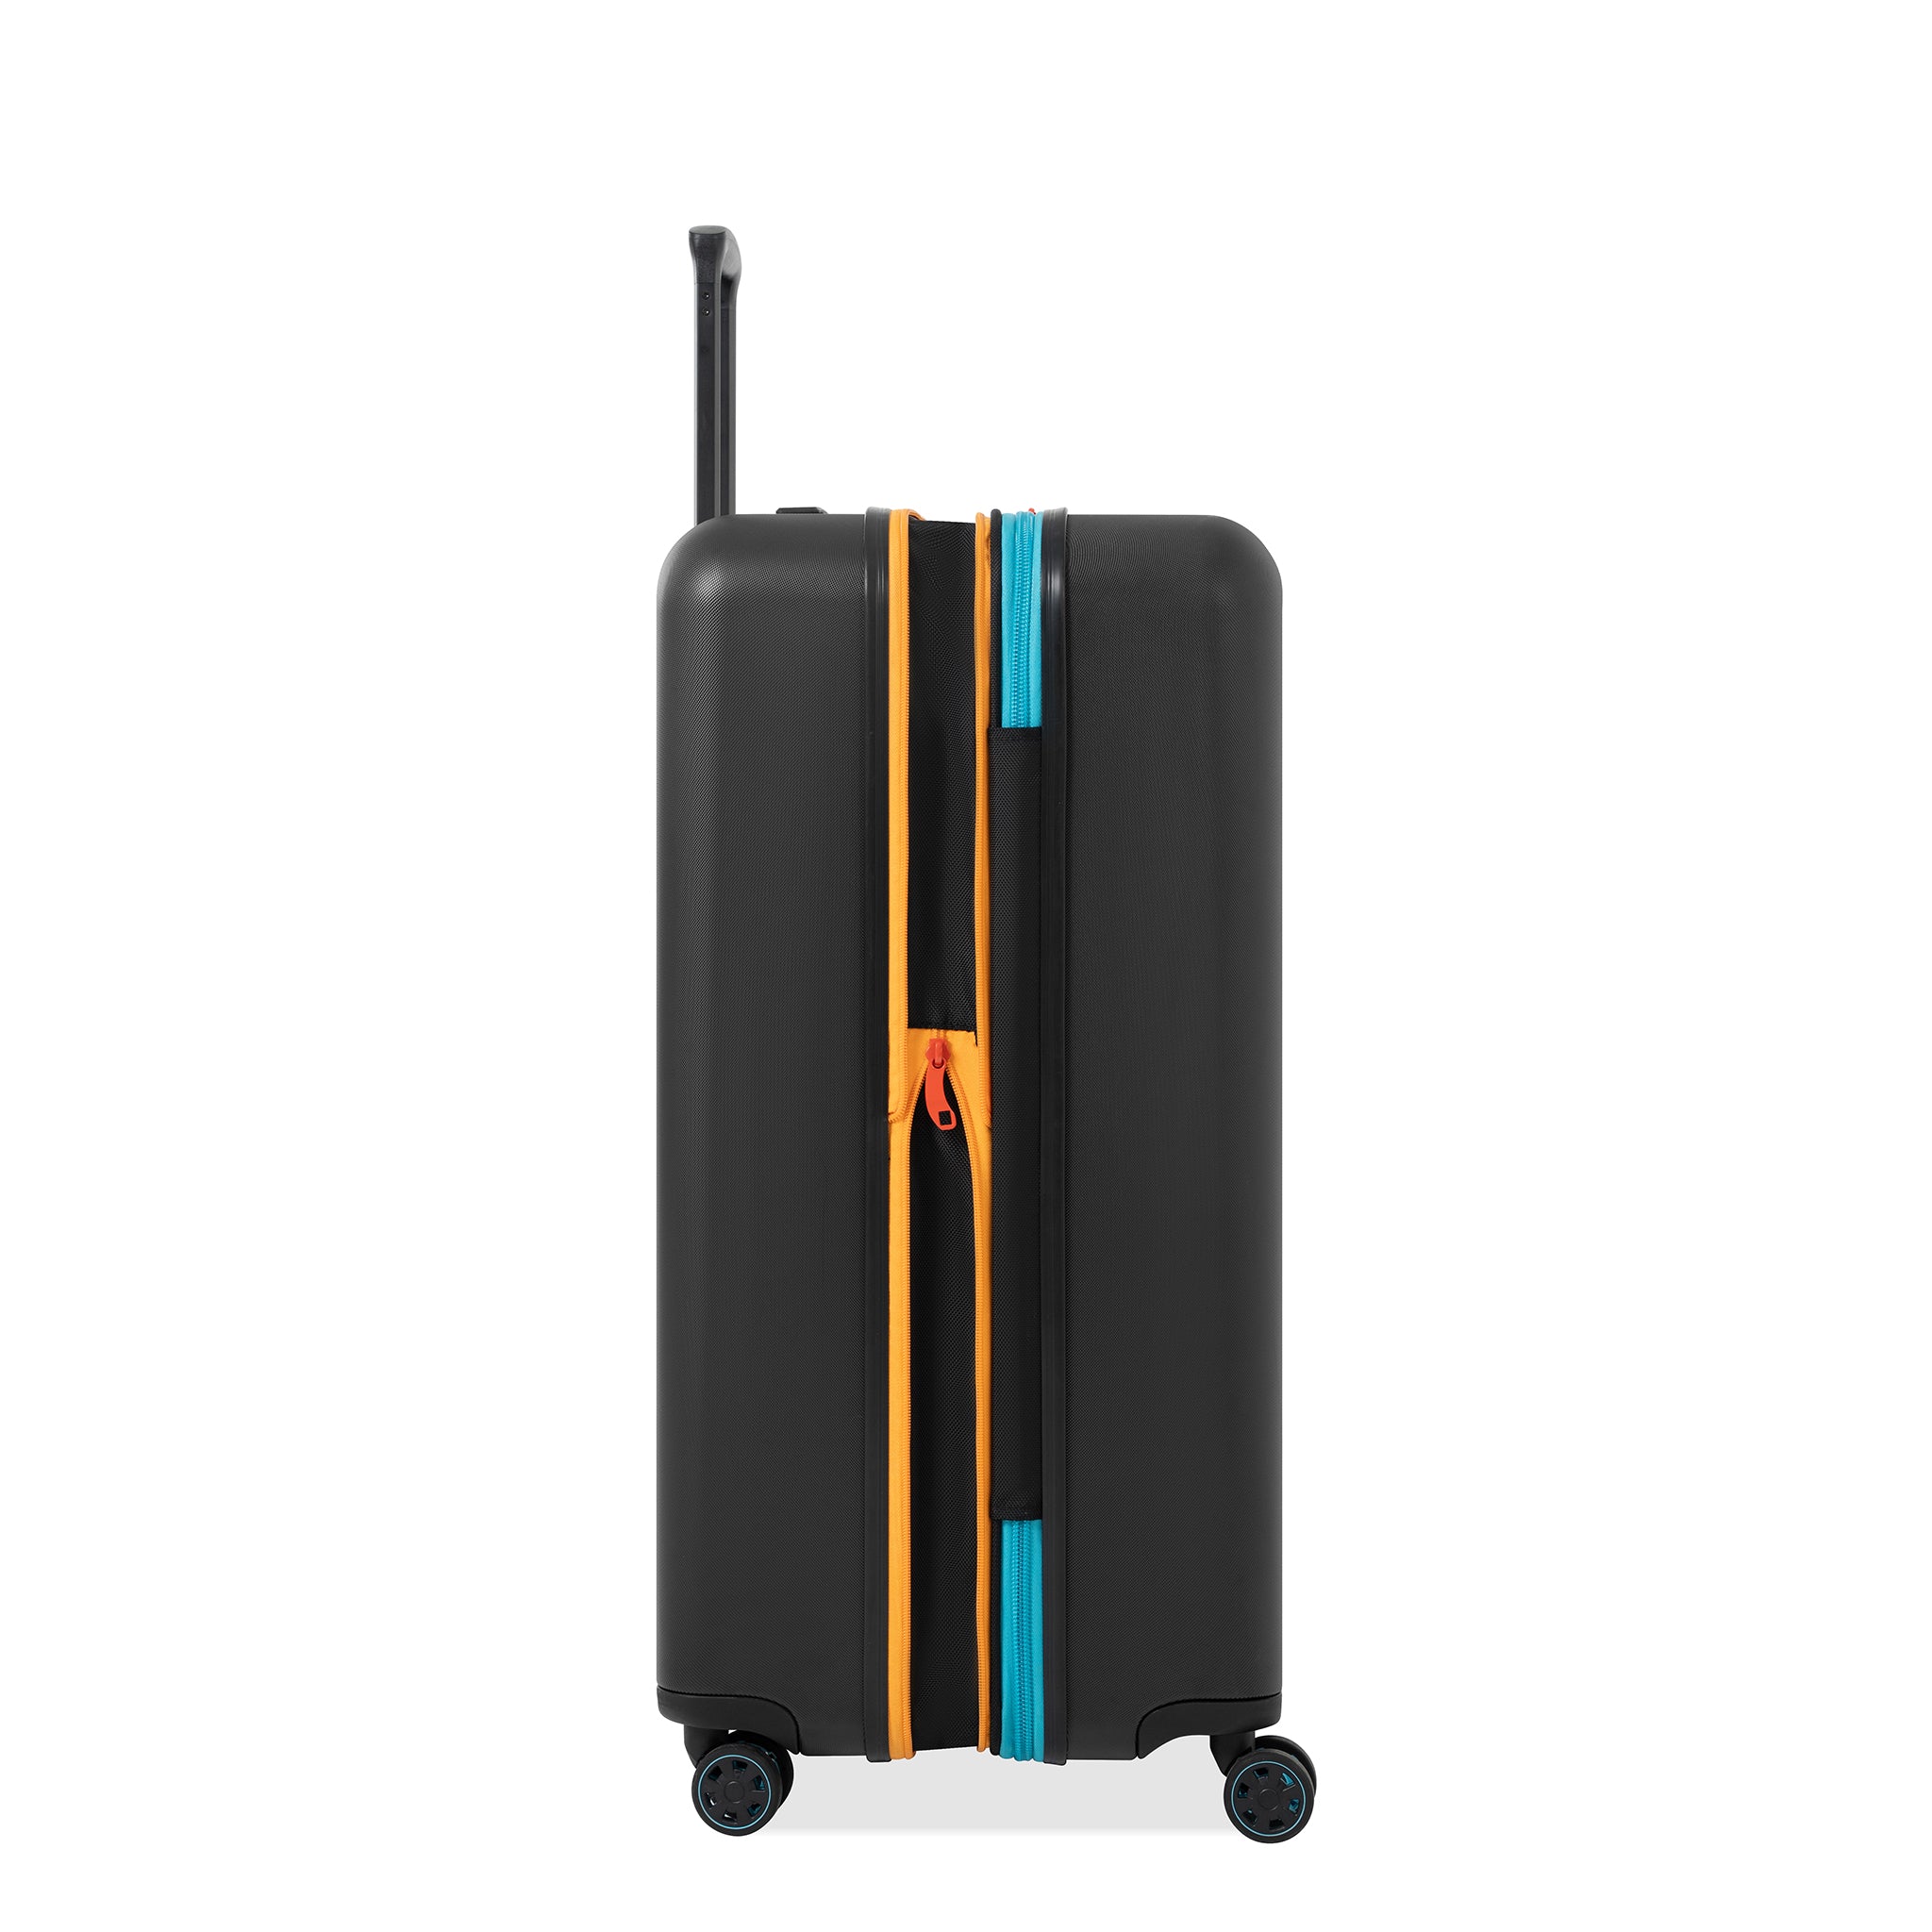 Side view of Sherpani hard-shell carry-on luggage, the Meridian in Chromatic. Meridian features include a retractable luggage handle, uncrushable exterior, TSA-approved locking zippers and four 36-degree spinner wheels. Chromatic color is primarily black with pops of color in red, yellow and blue. 